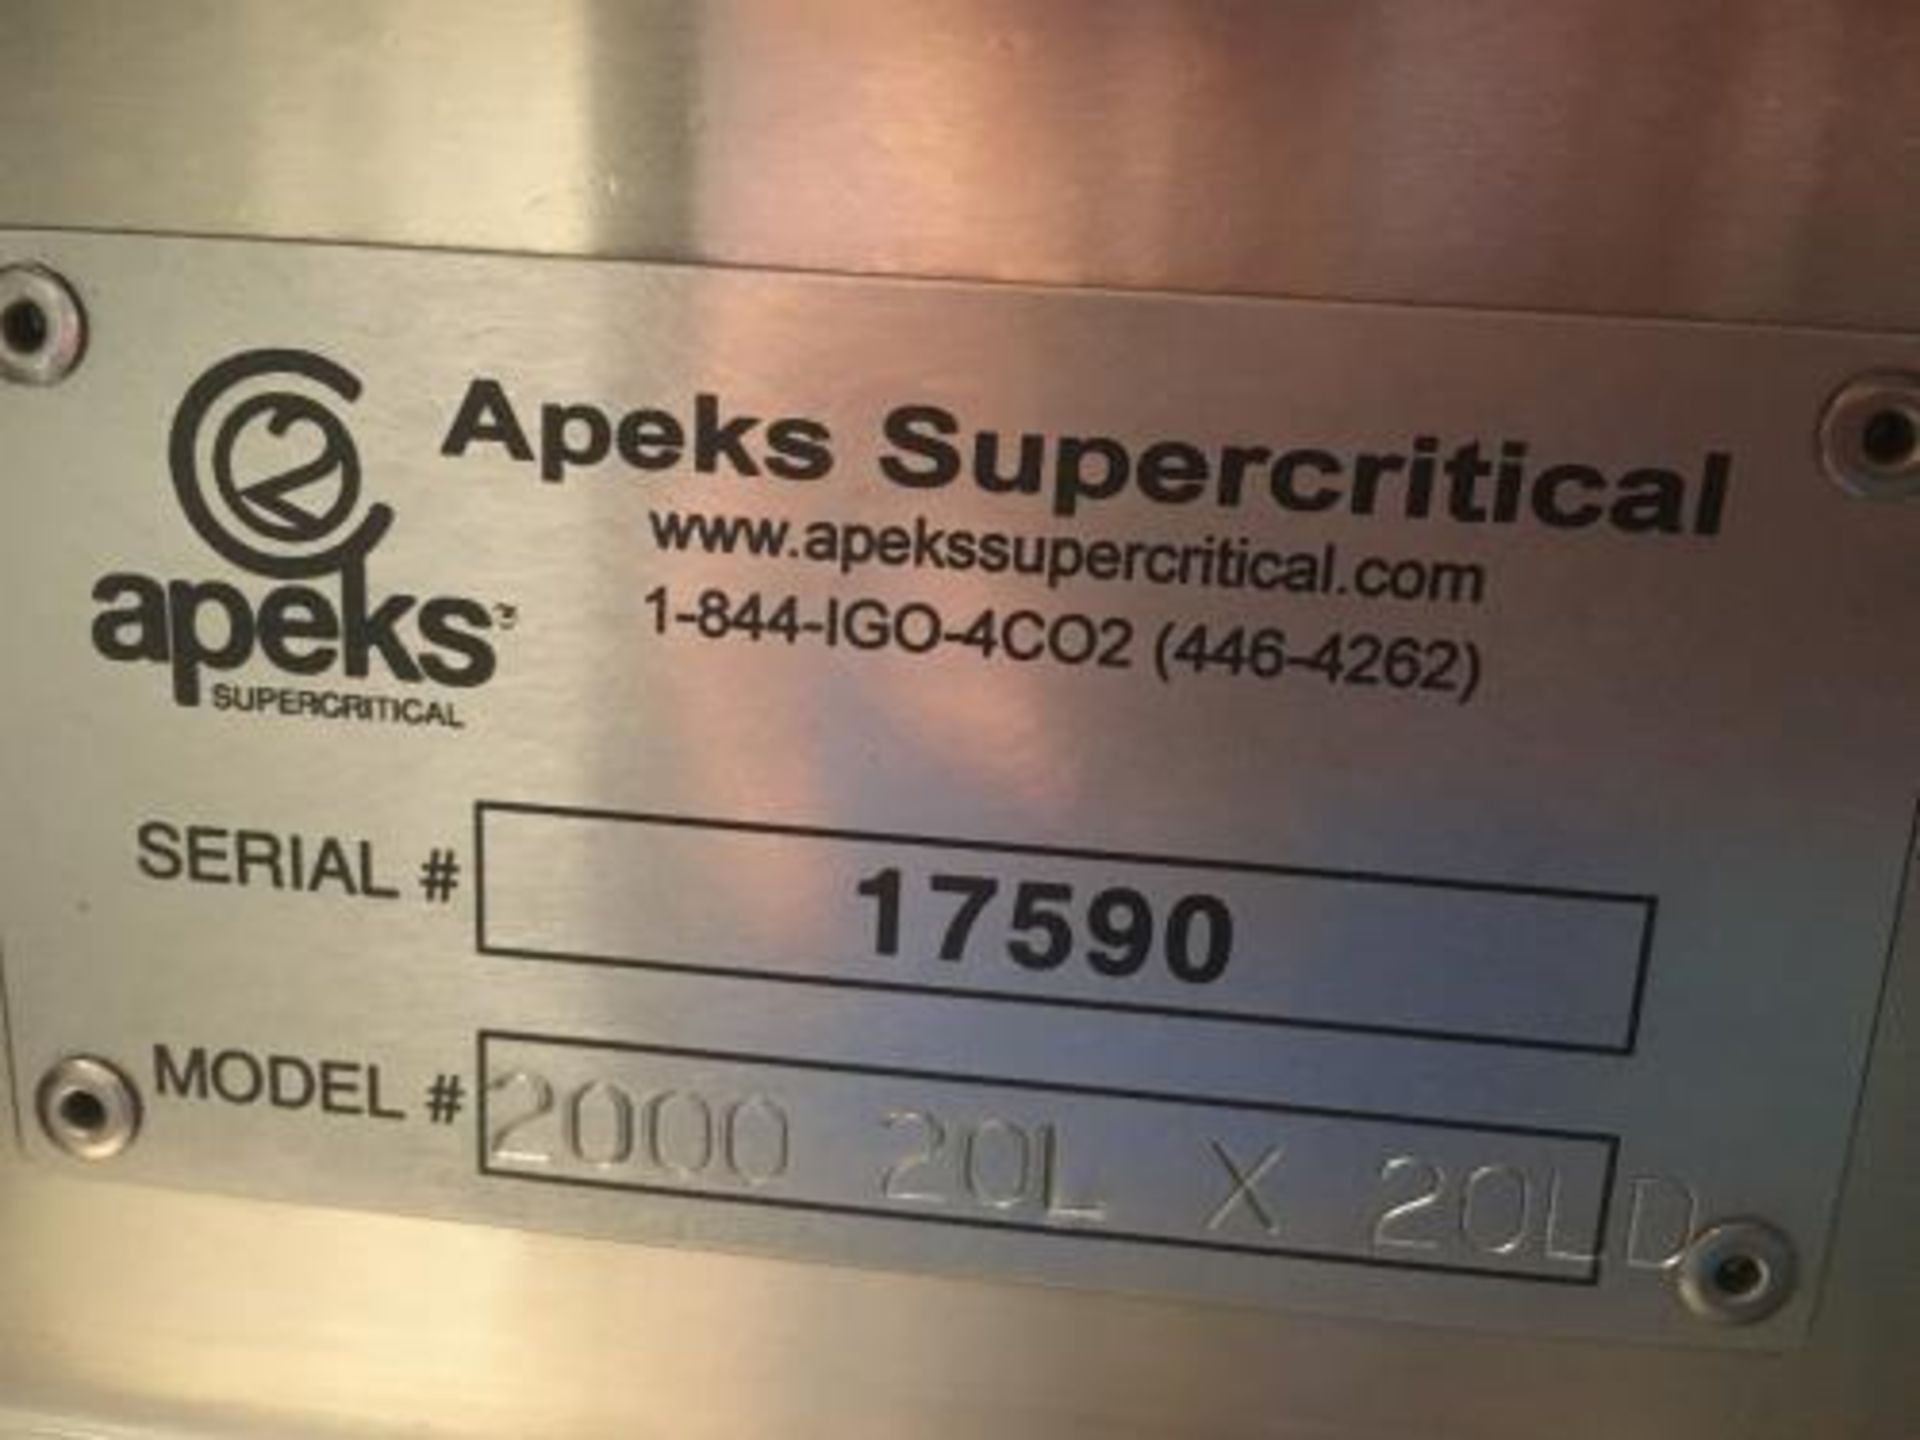 Used-Apeks "Transformer" Subcritical & Supercritical CO2 Extraction System, Model 2000 20L X 20LD - Image 14 of 14